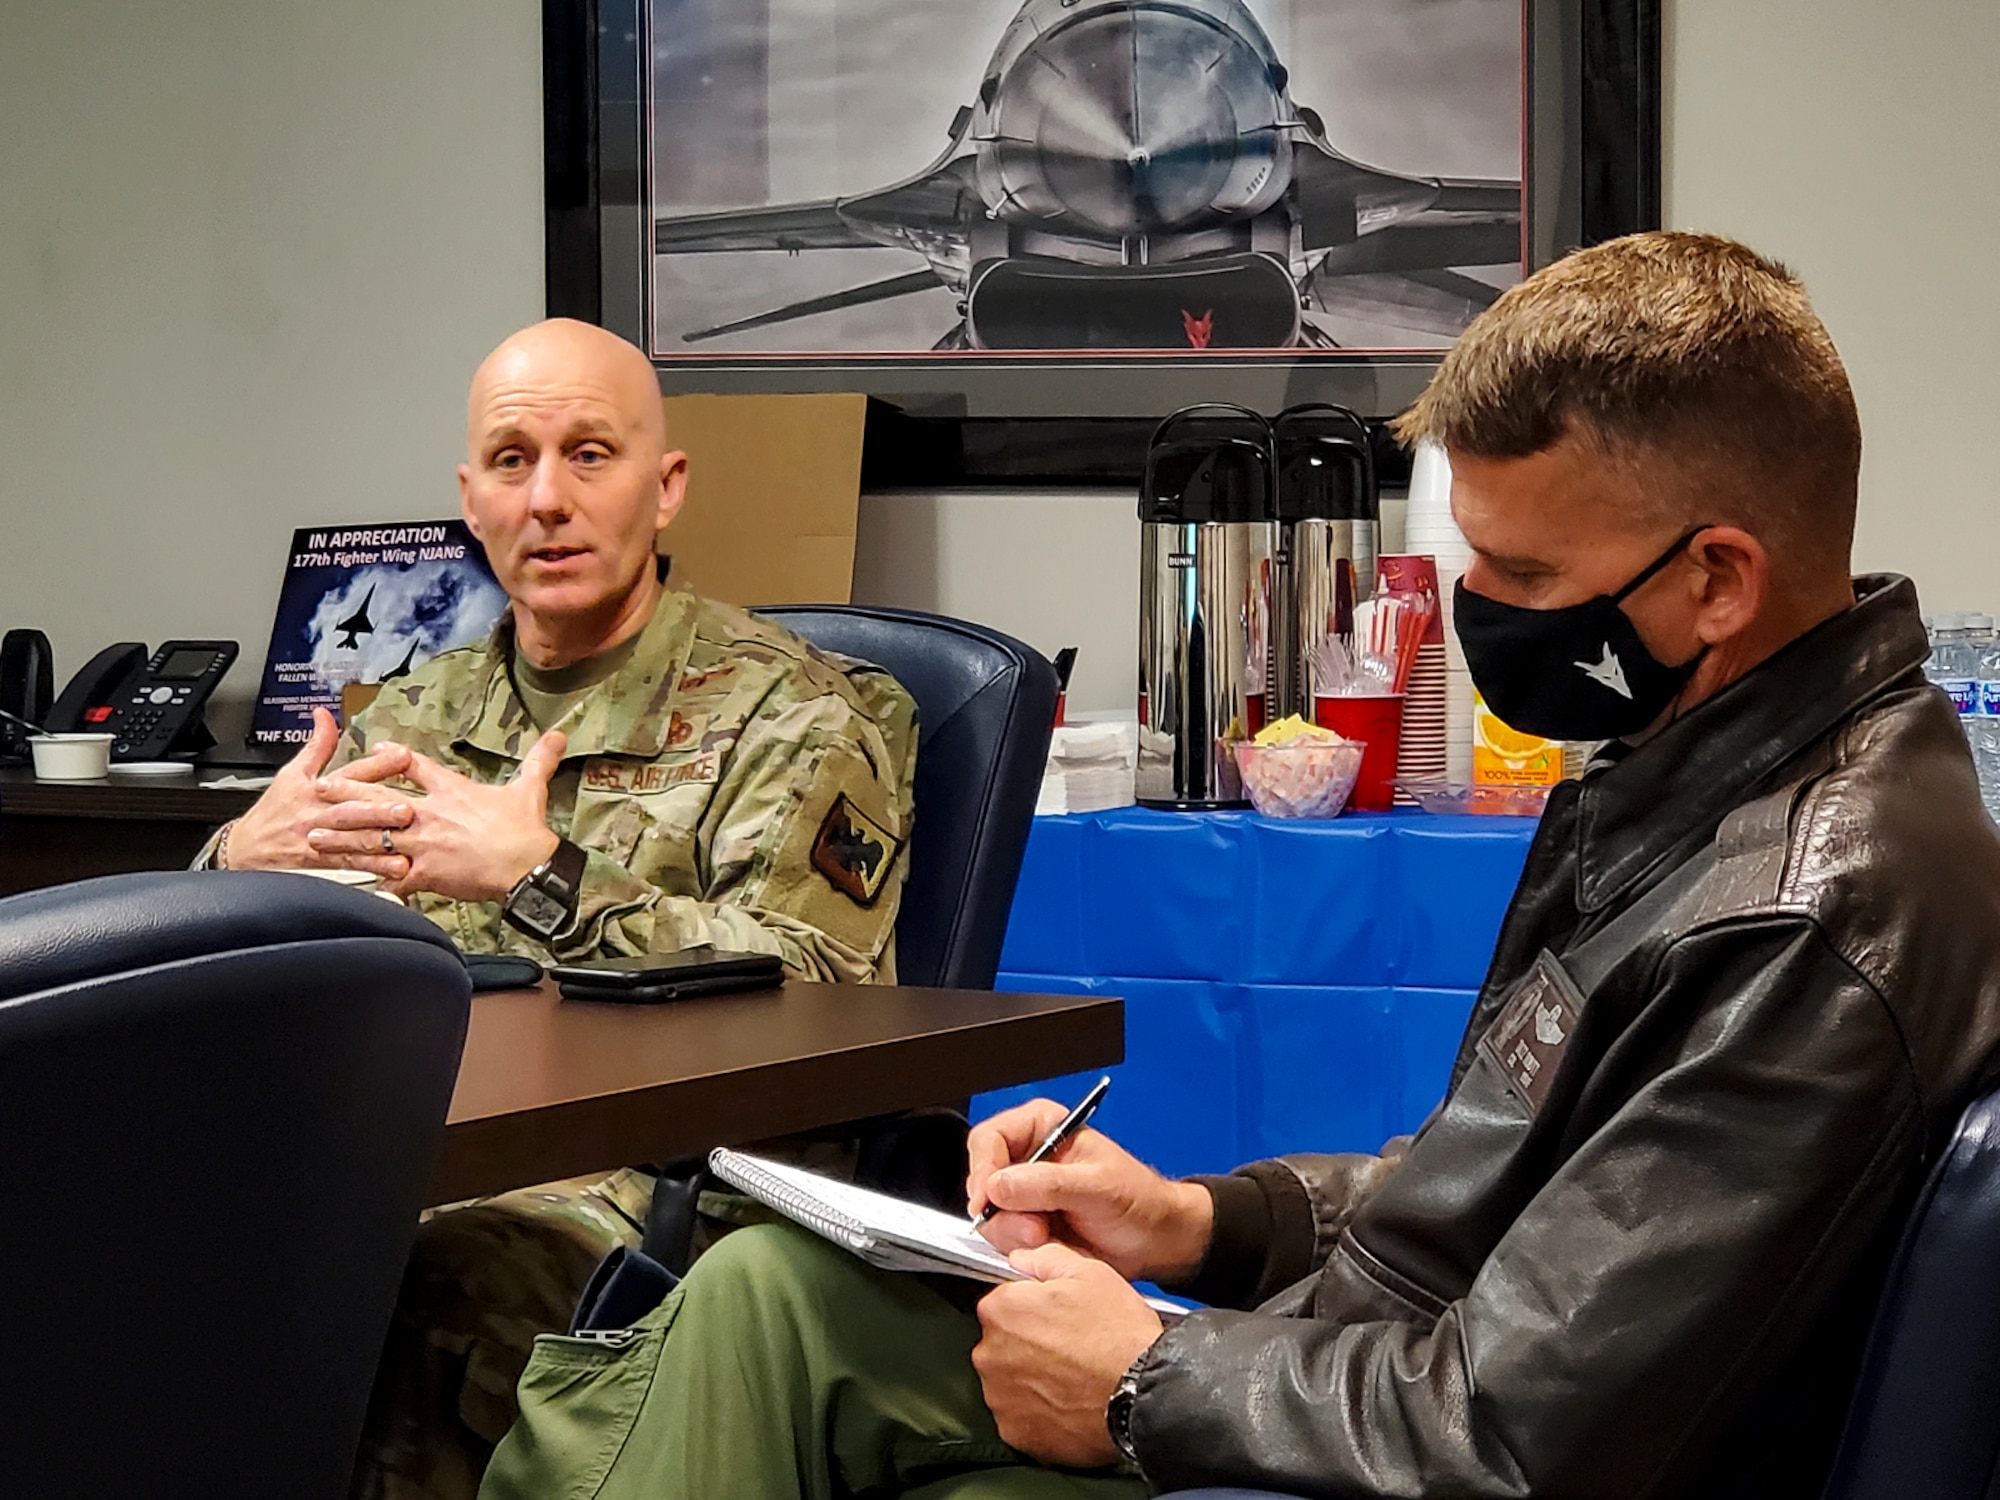 An image of U.S. Air Force Brig. Gen. Donald K. Carpenter, left, director of Logistics, Engineering and Force Protection, National Guard Bureau, and Col. Derek B. Routt, commander of the 177th Fighter Wing of the New Jersey Air National Guard, conducting a briefing.